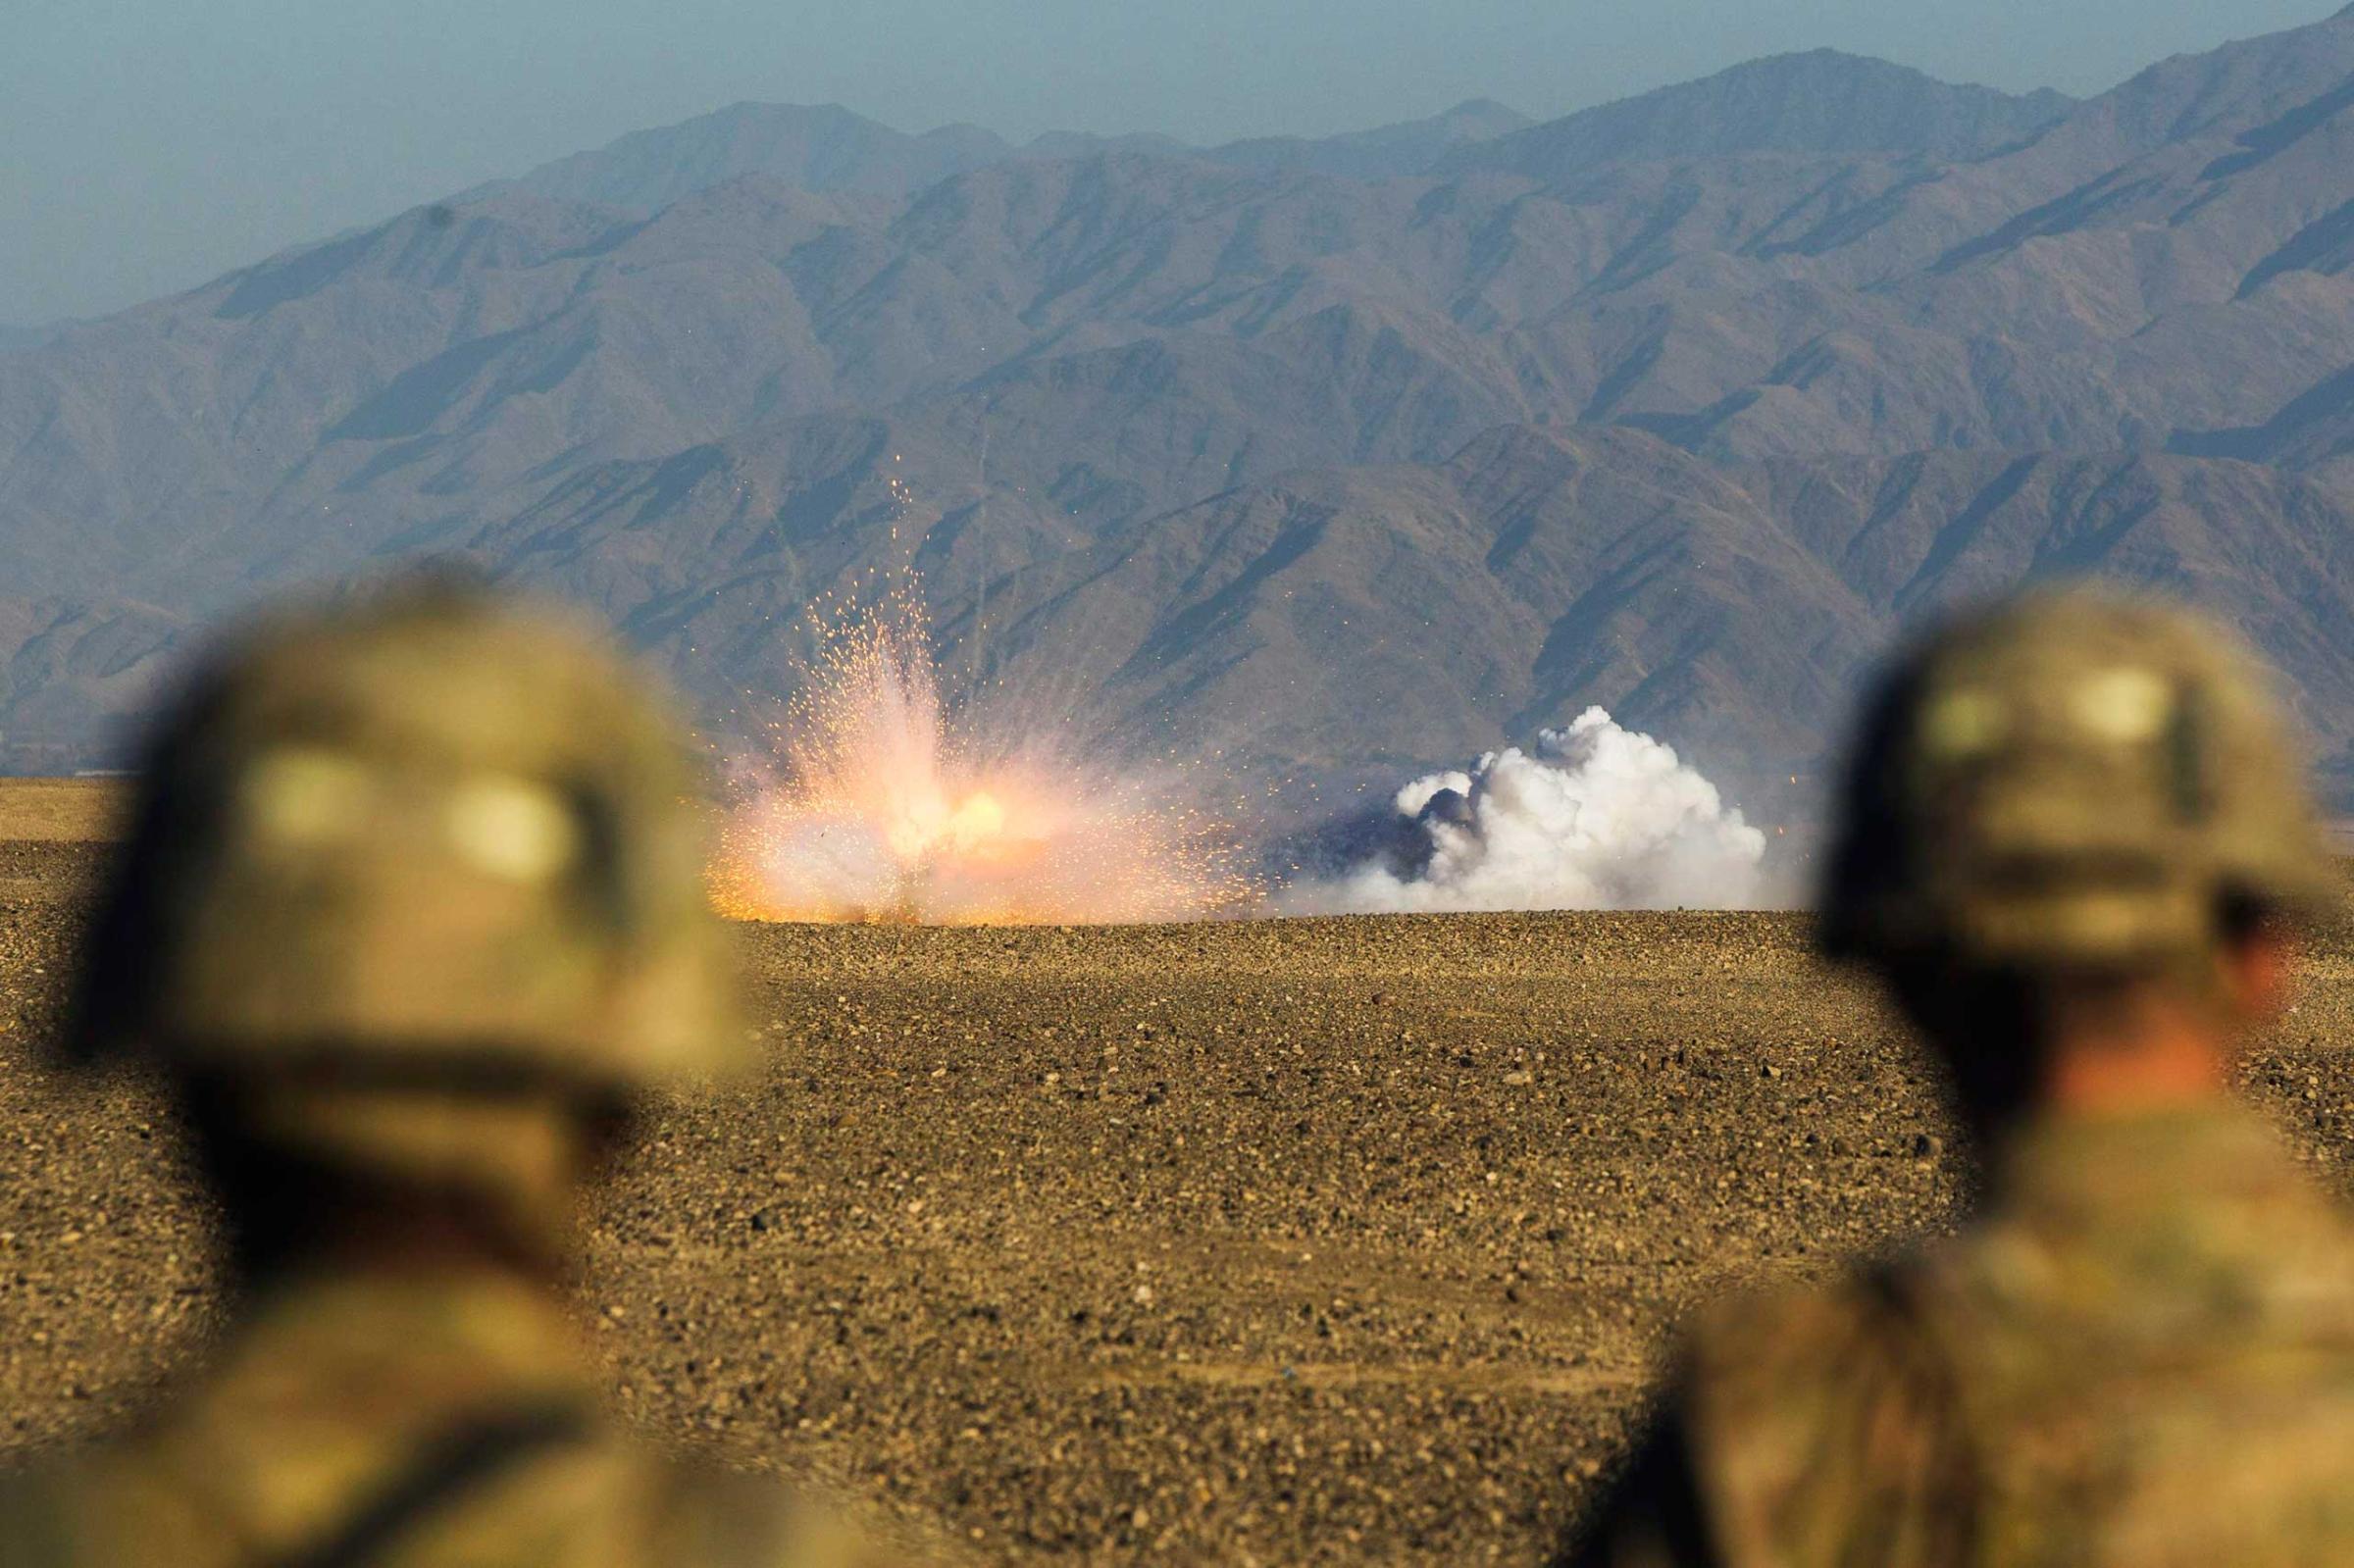 U.S. soldiers in Dragon Company of the 3rd Cavalry Regiment watch rounds explode downrange during a mortar exercise near forward operating base Gamberi in the Laghman province of Afghanistan